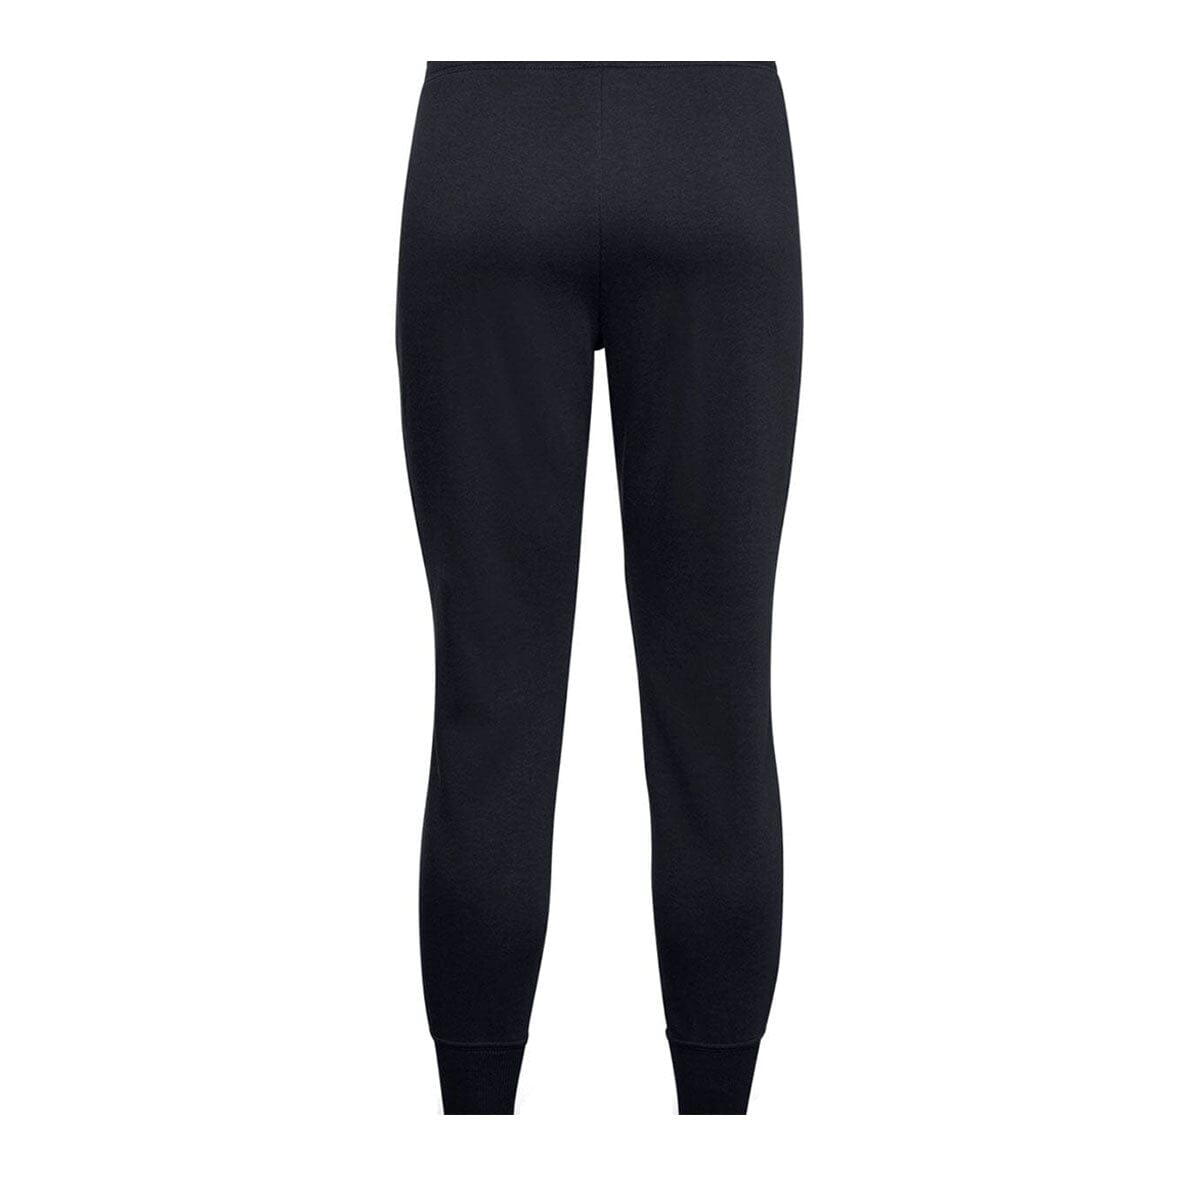 Women's Under Armour Motion Joggers - Black MD